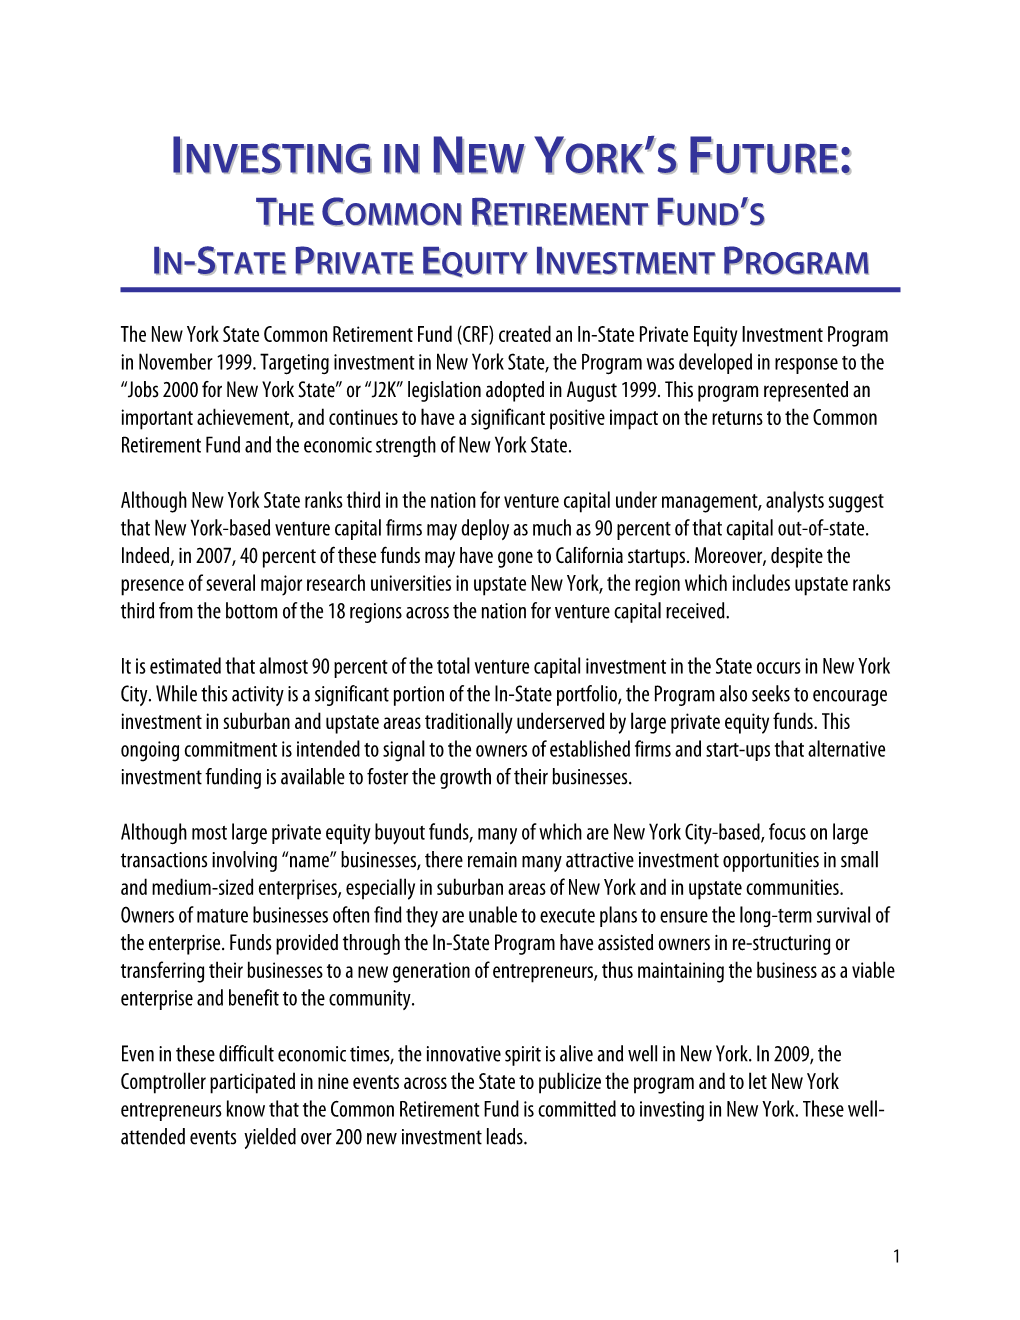 Investing in New York's Future: the Common Retirement Fund's In-State